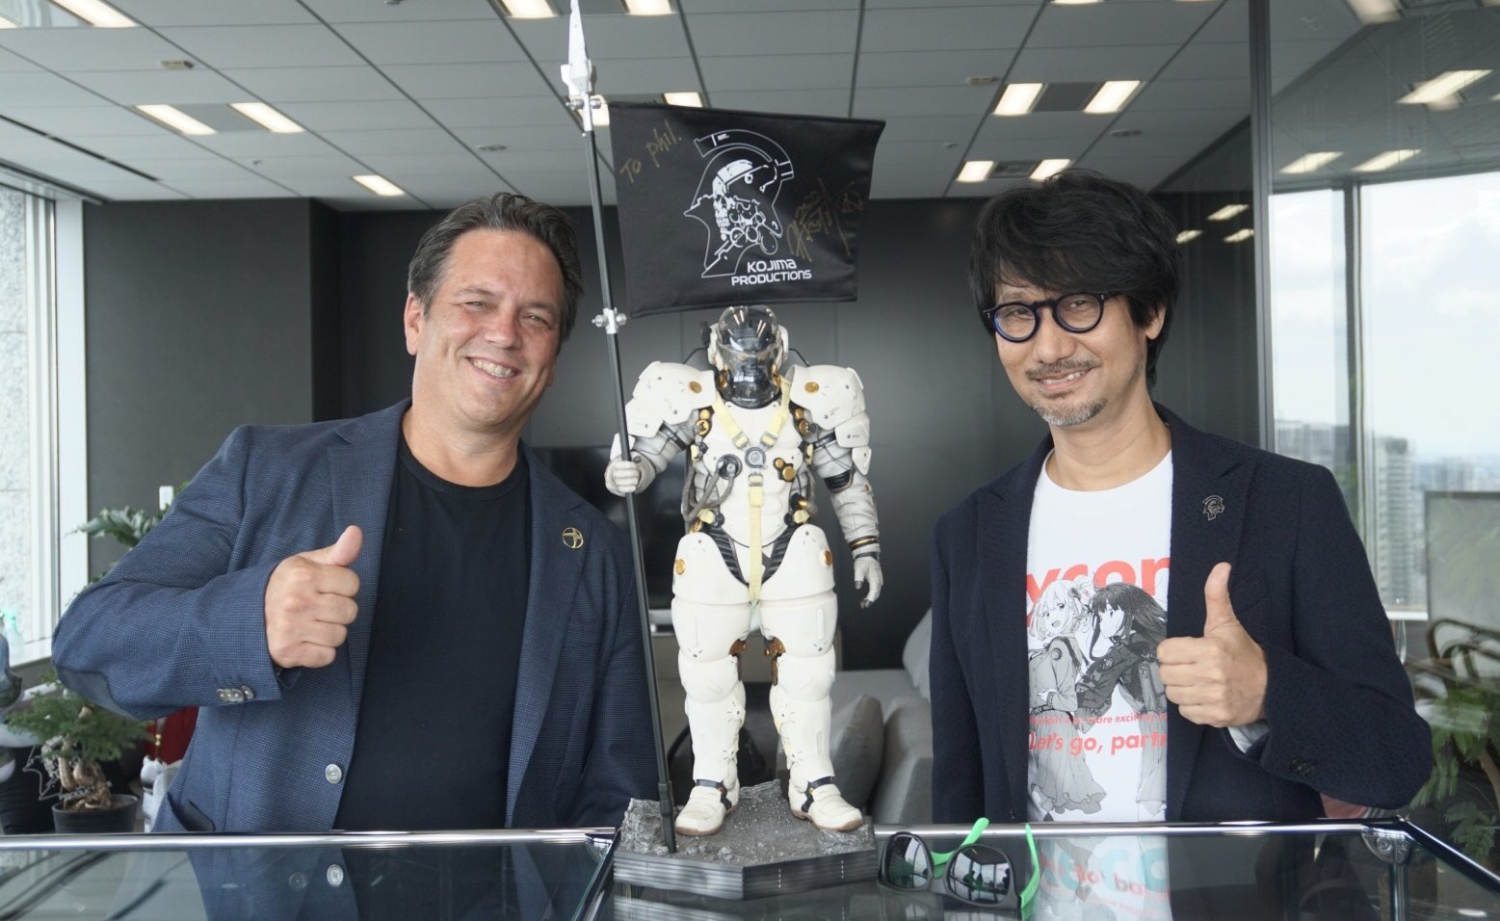 Microsoft will release Kojima Productions' next game, OD, with